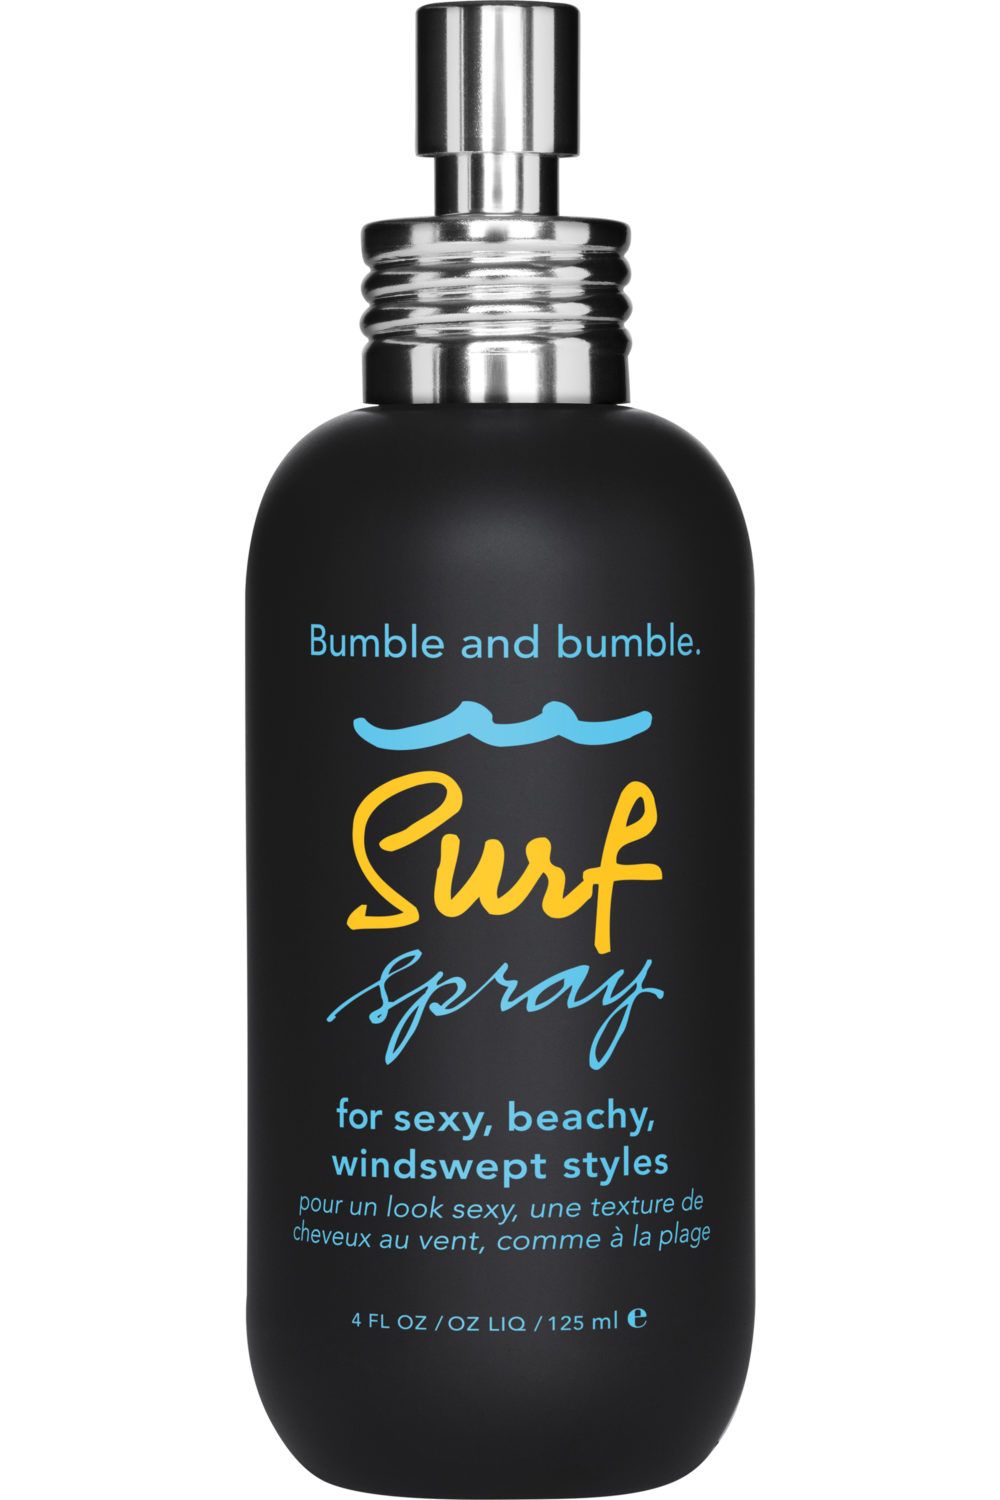 Bumble and bumble - Surf Spray 125ml